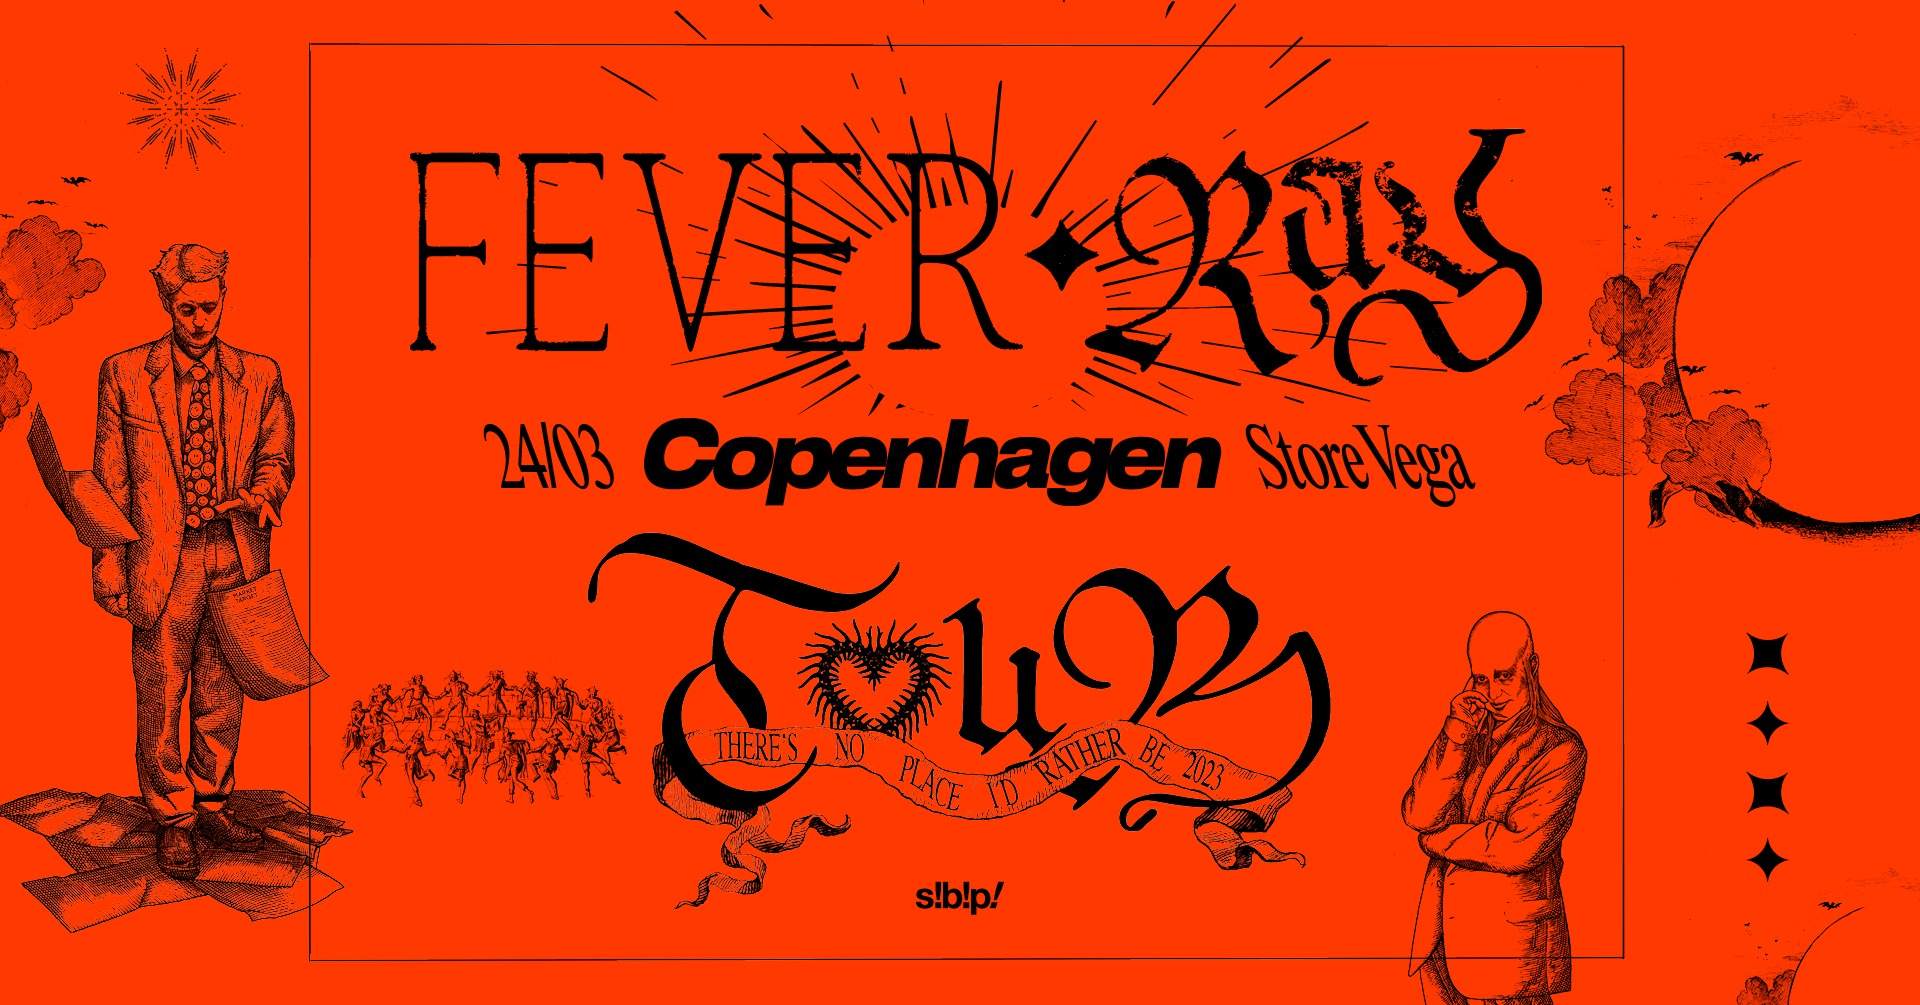 Fever Ray (SE) – sold out – waiting list - Página frontal